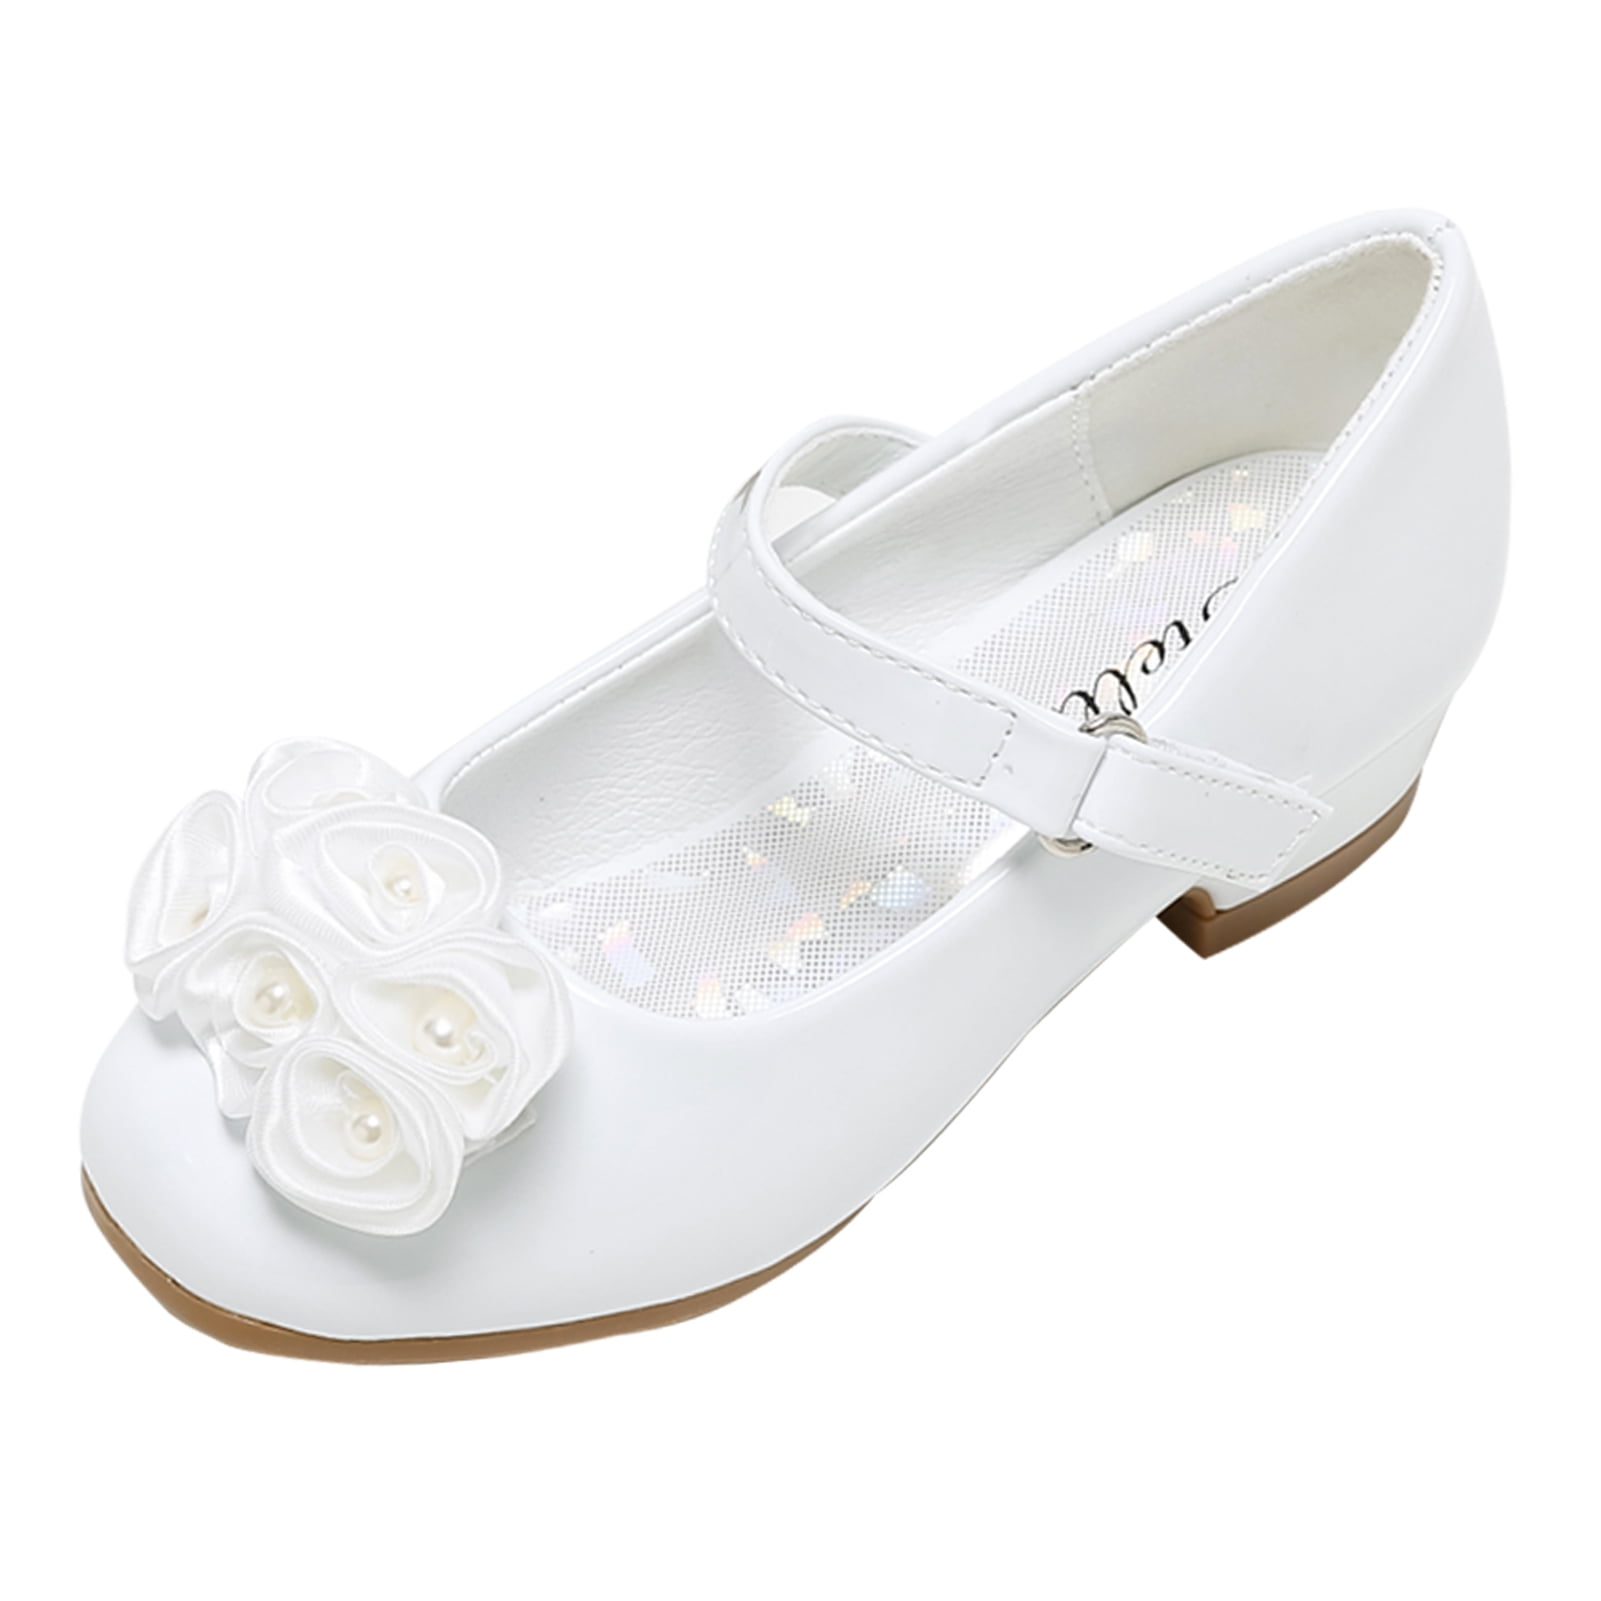 Stelle Girls White Mary Jane Shoes Low Heel Easter First Communion ...